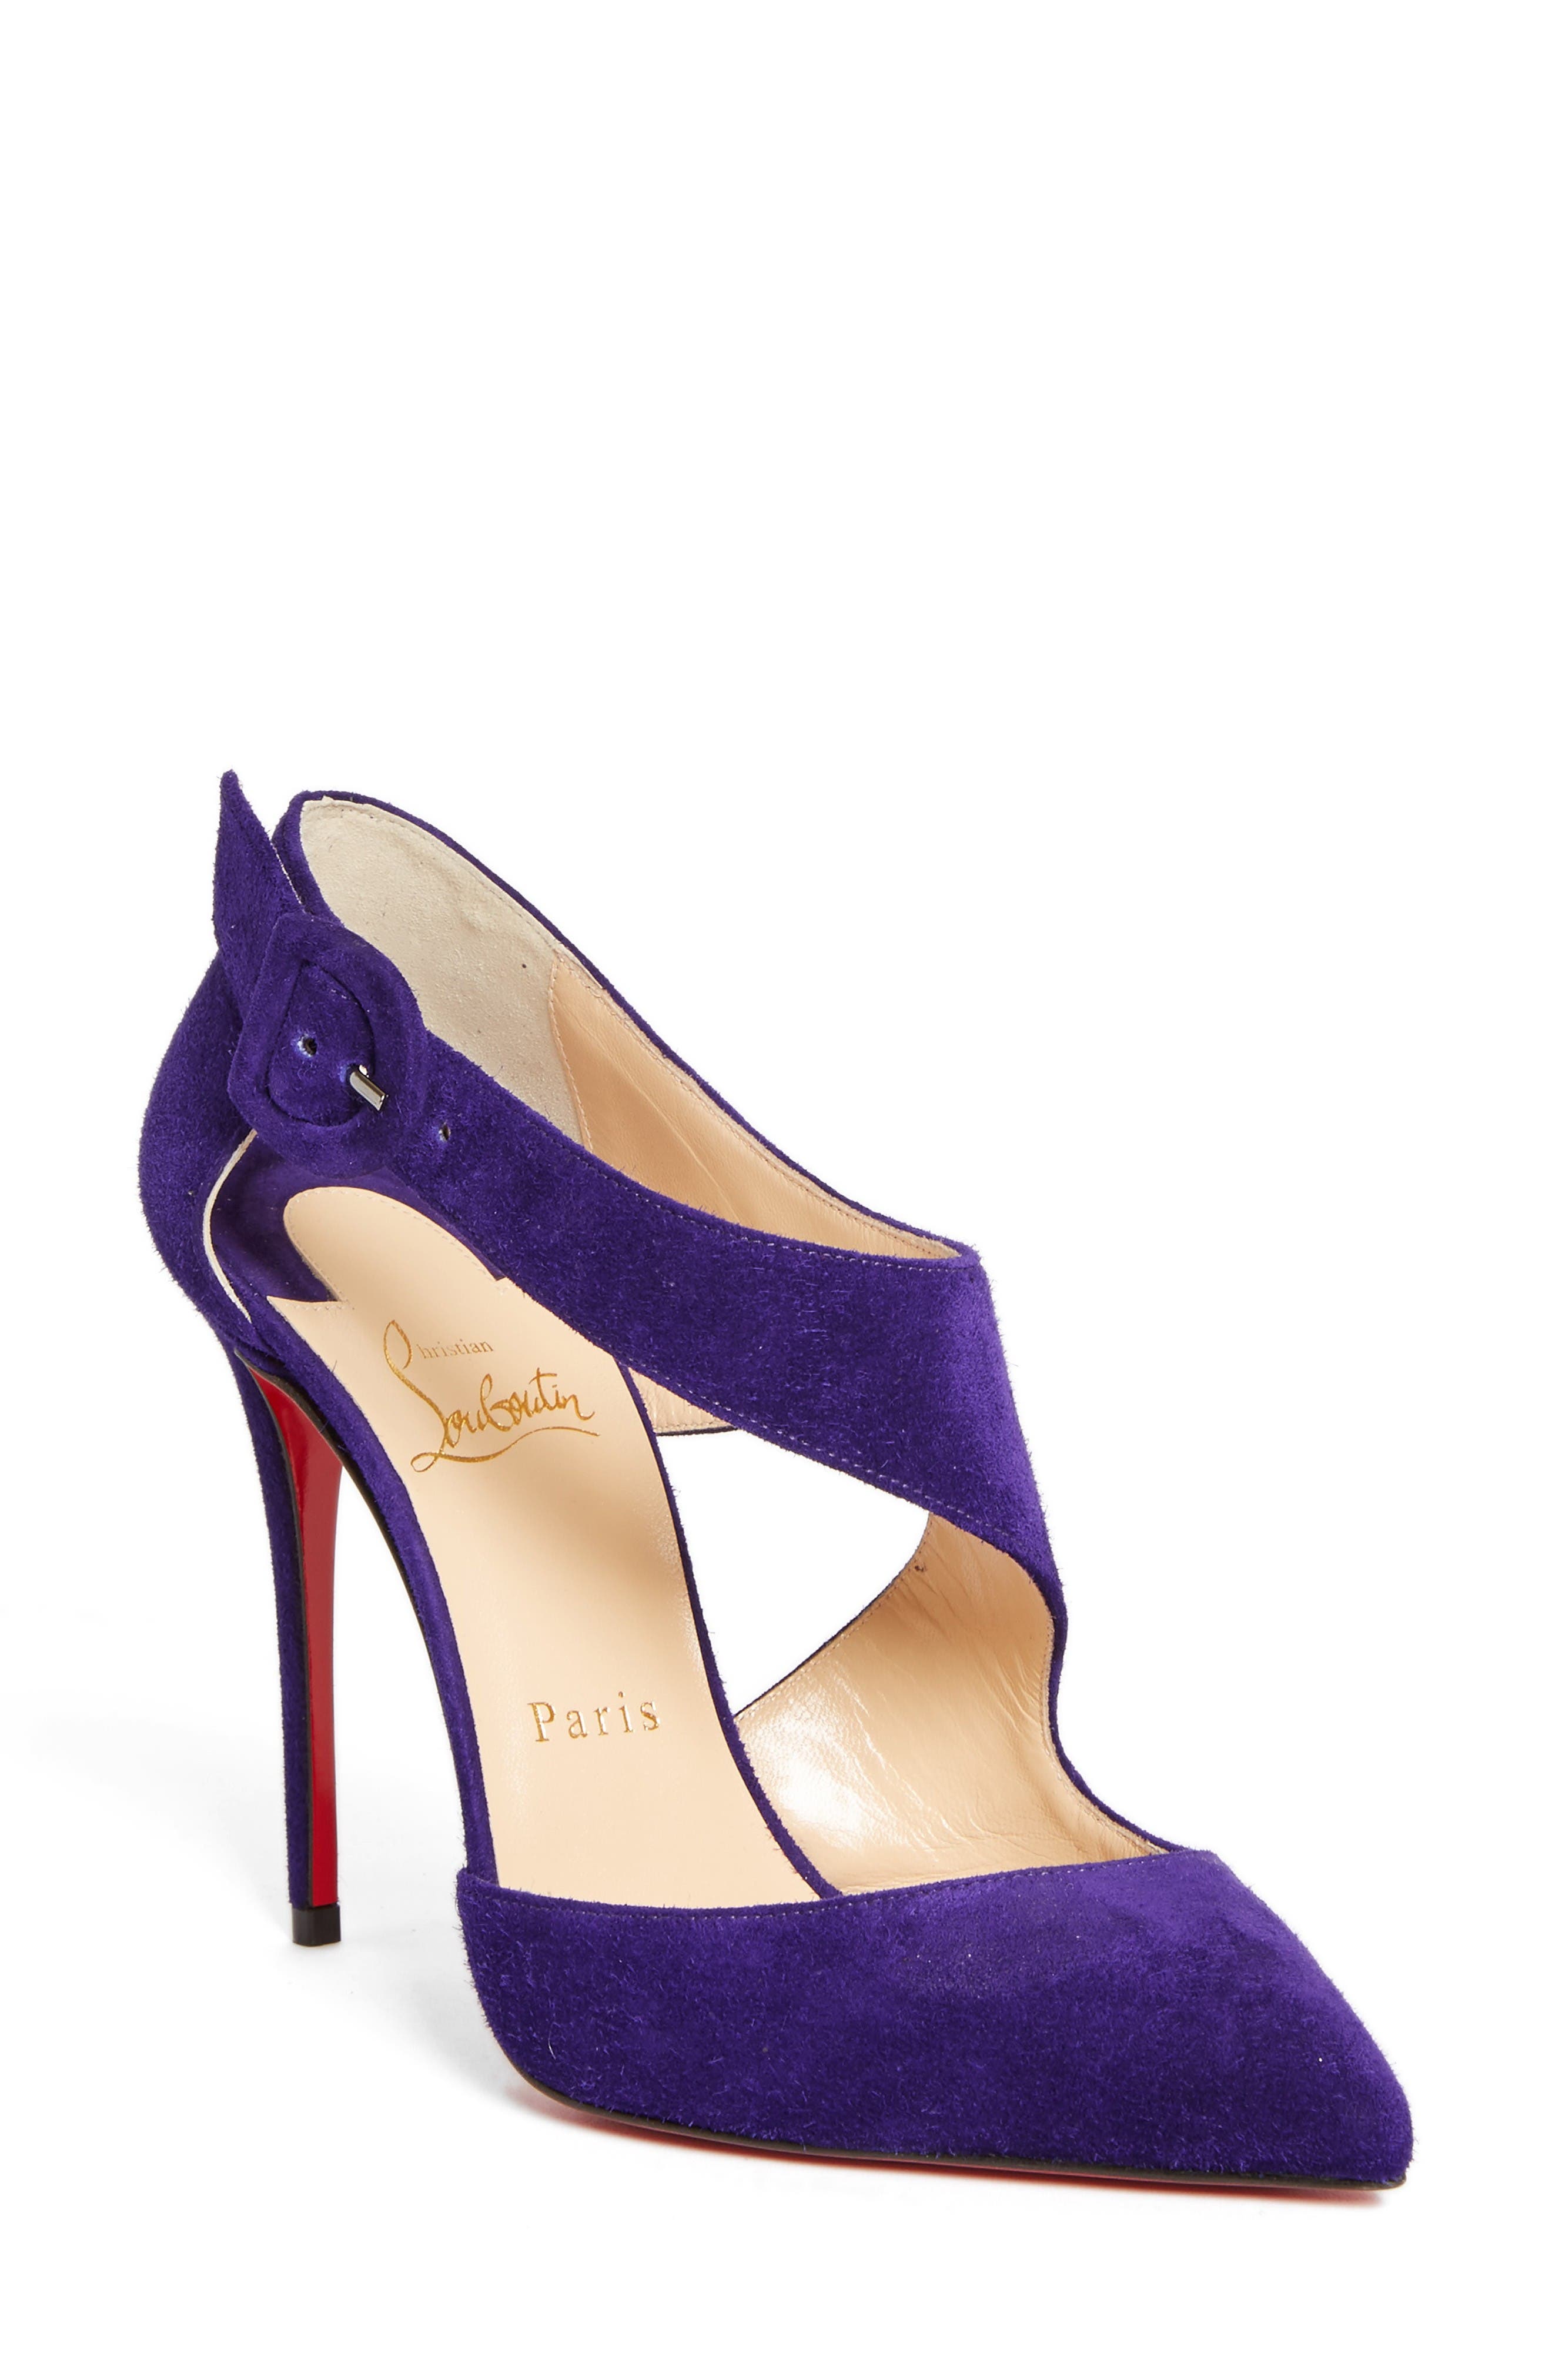 louboutin shoes nordstrom rack